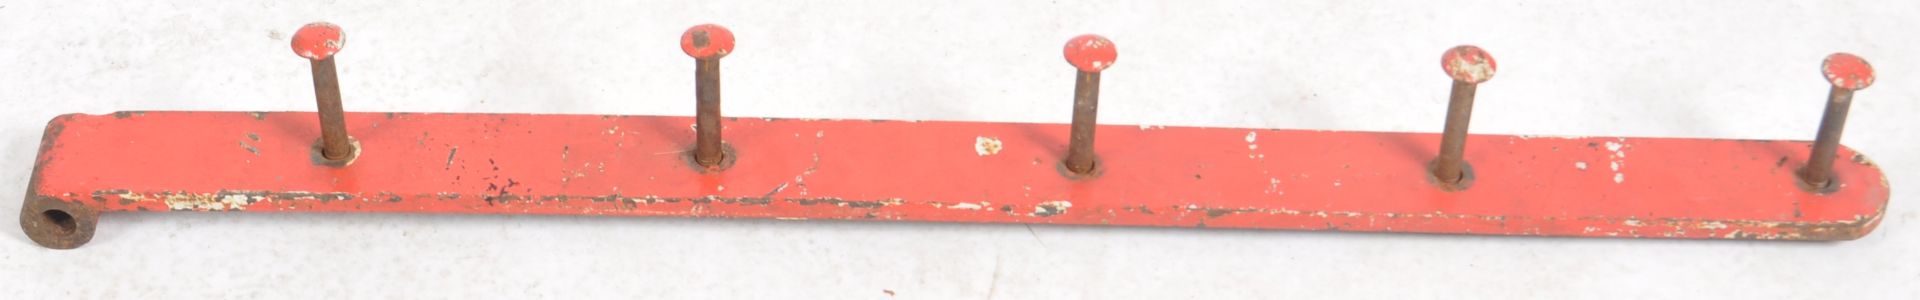 EARLY 20TH CENTURY UPCYCLED CAR SPRING COAT HOOK RACK - Image 2 of 5